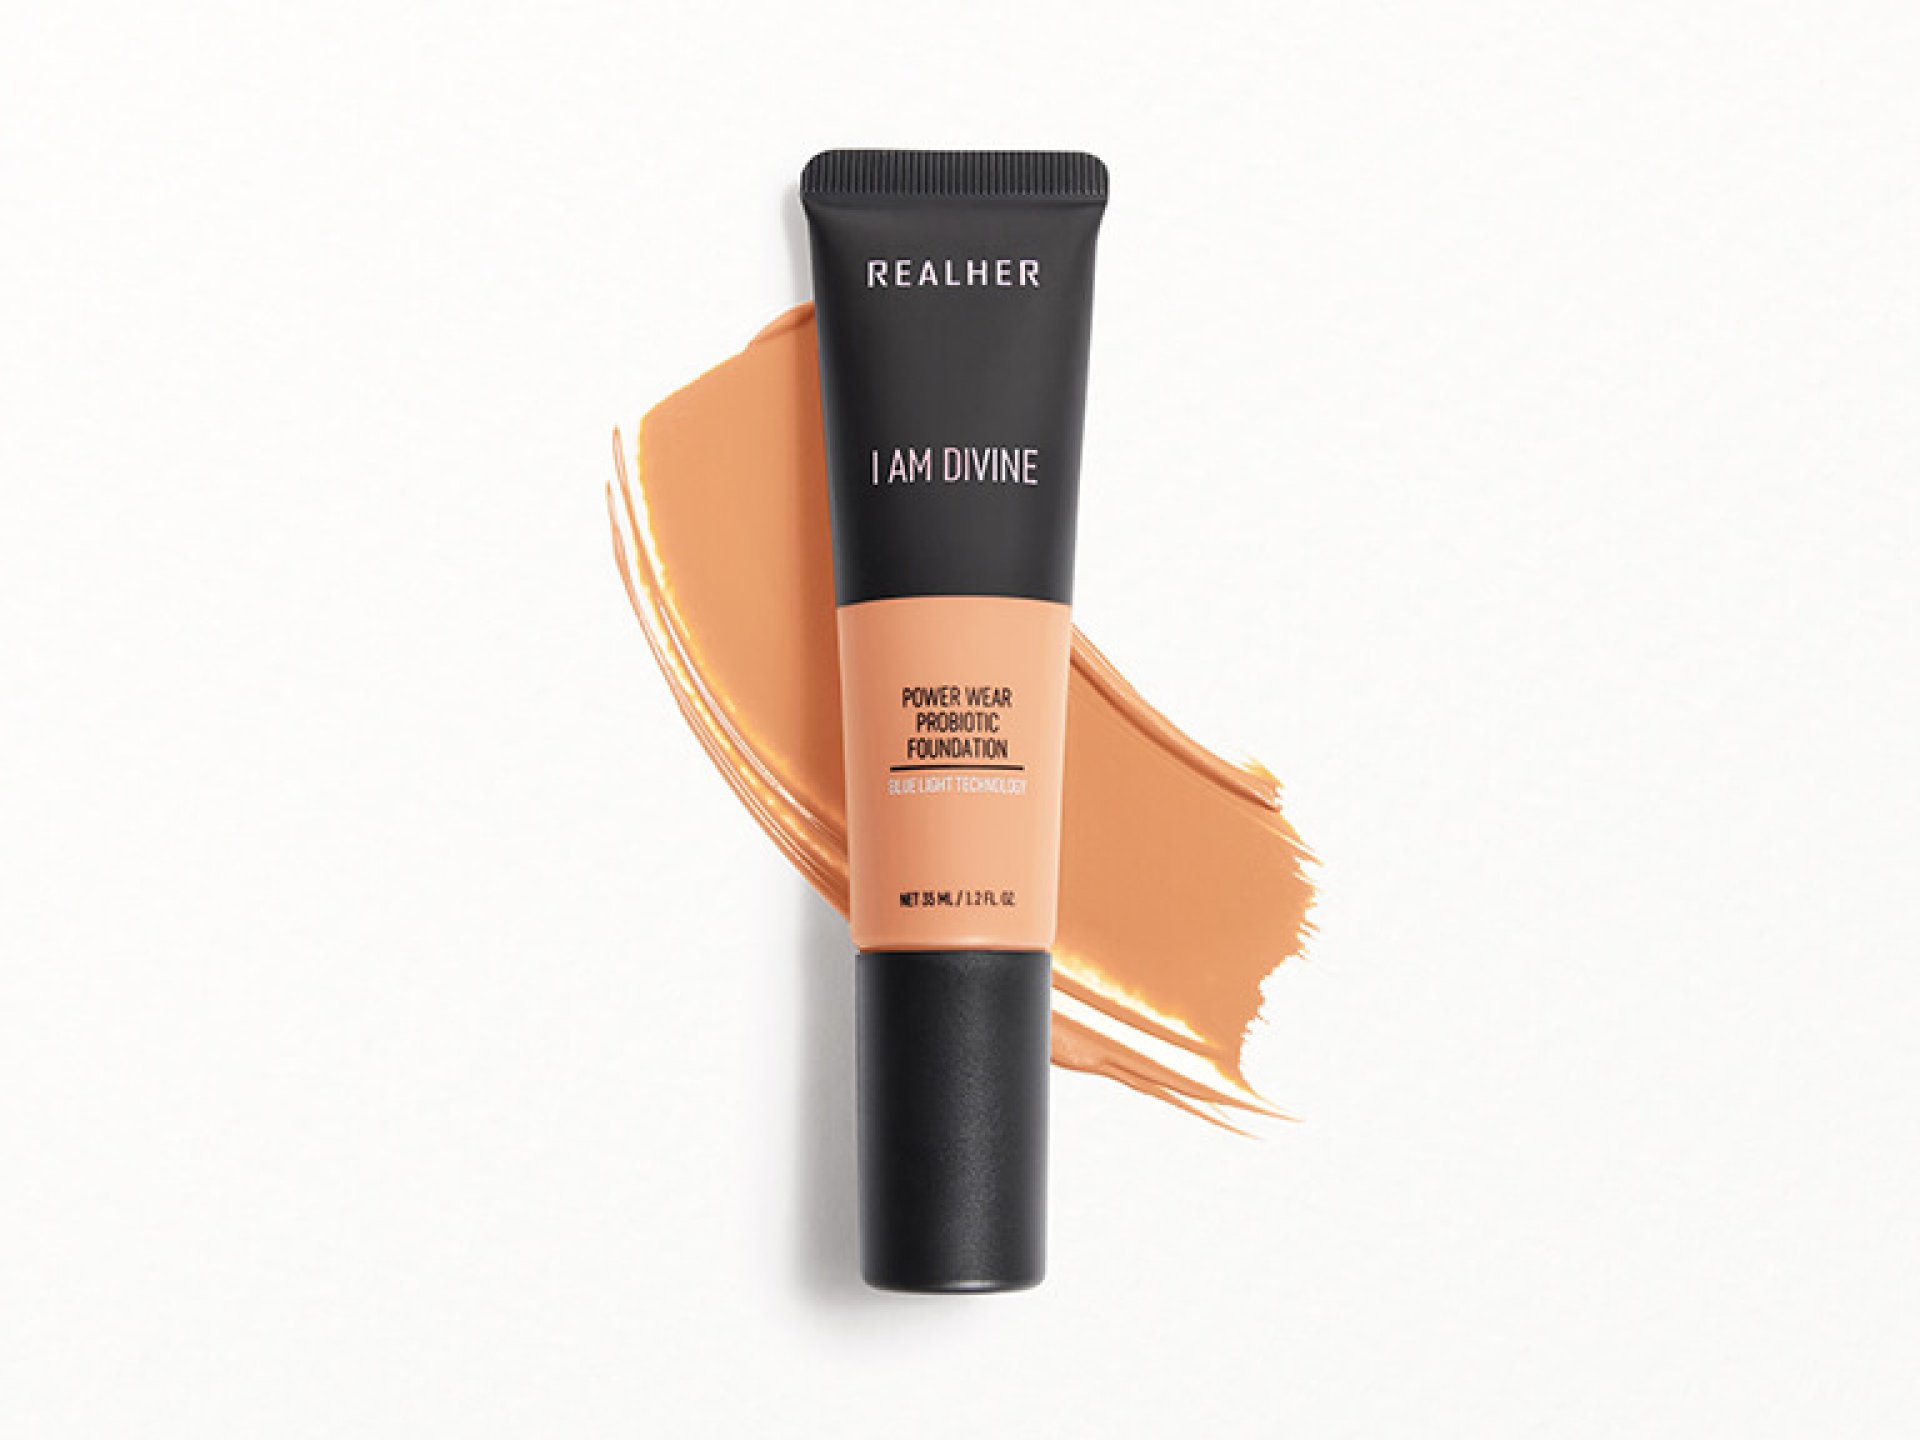 REALHER Power Wear Probiotic Foundation in I Am Divine